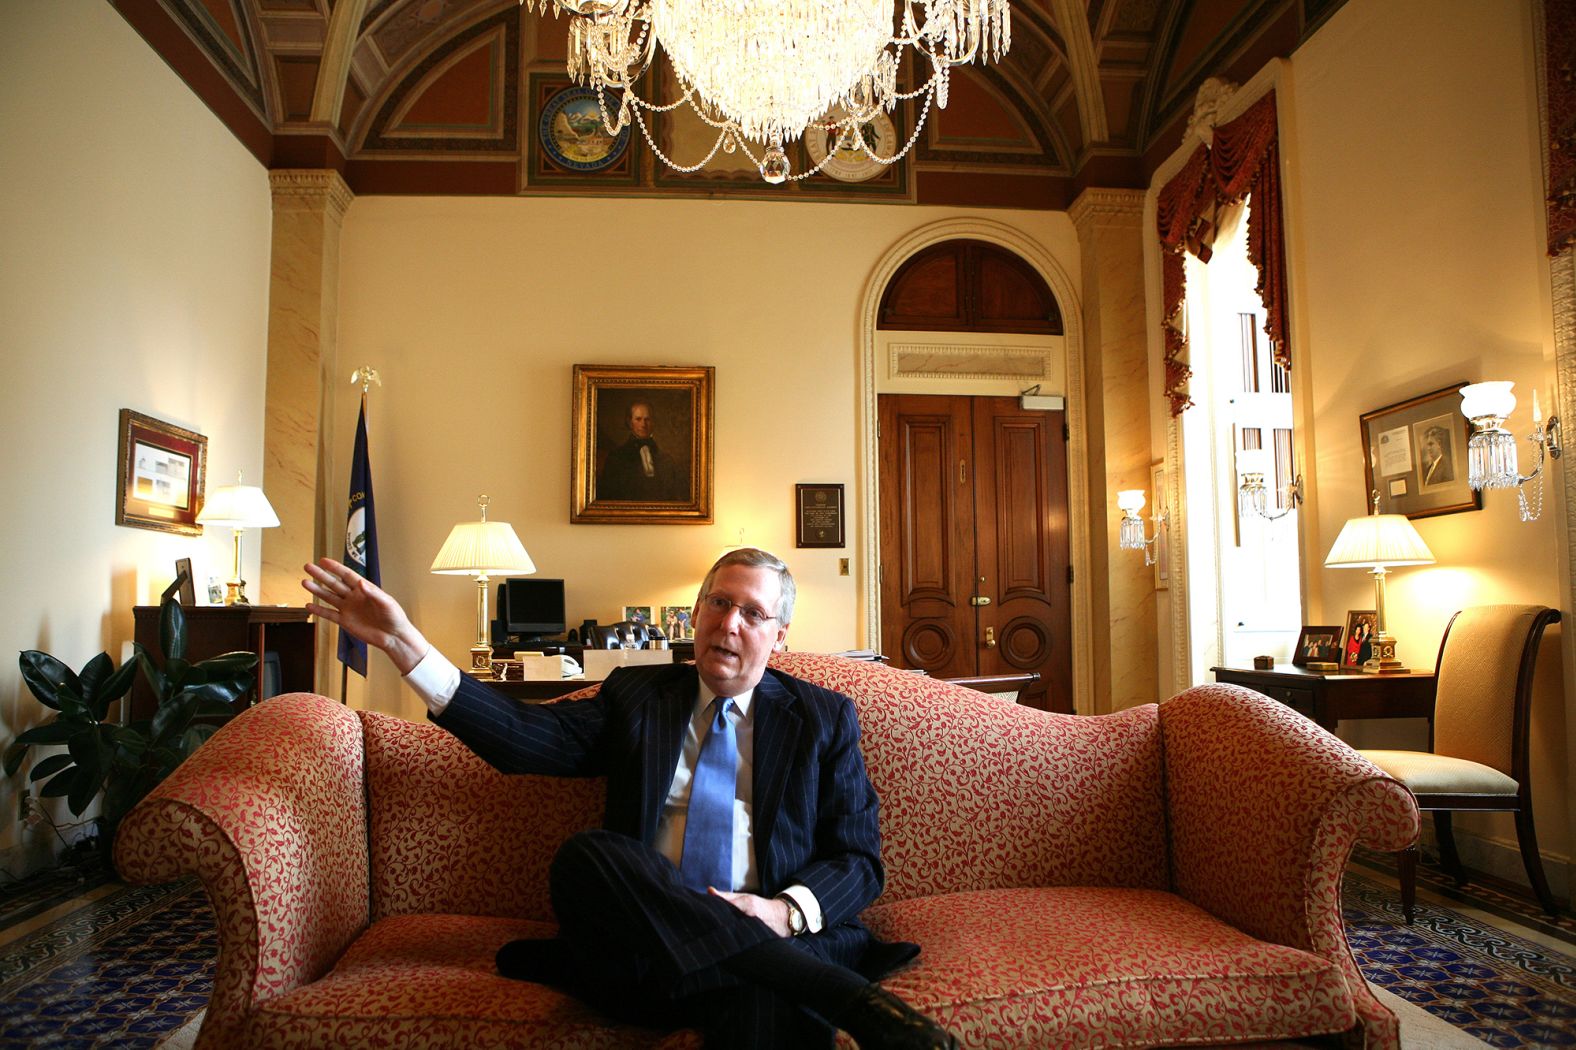 McConnell sits in his office during an interview in November 2006.